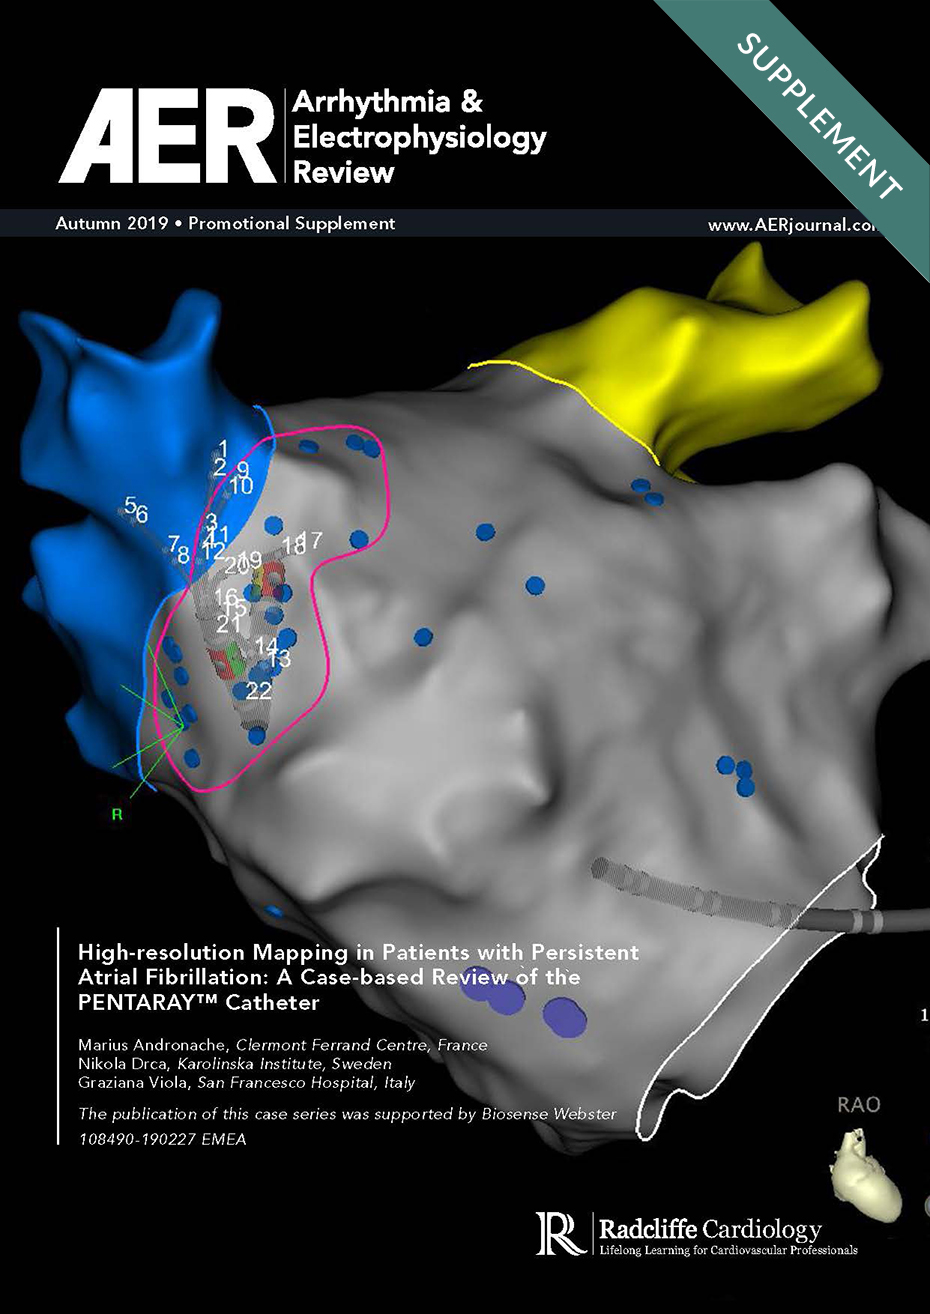 High-Resolution Mapping In Patients With Persistent Atrial Fibrillation: A Case-Based Review Of The PENTARAY™ Catheter